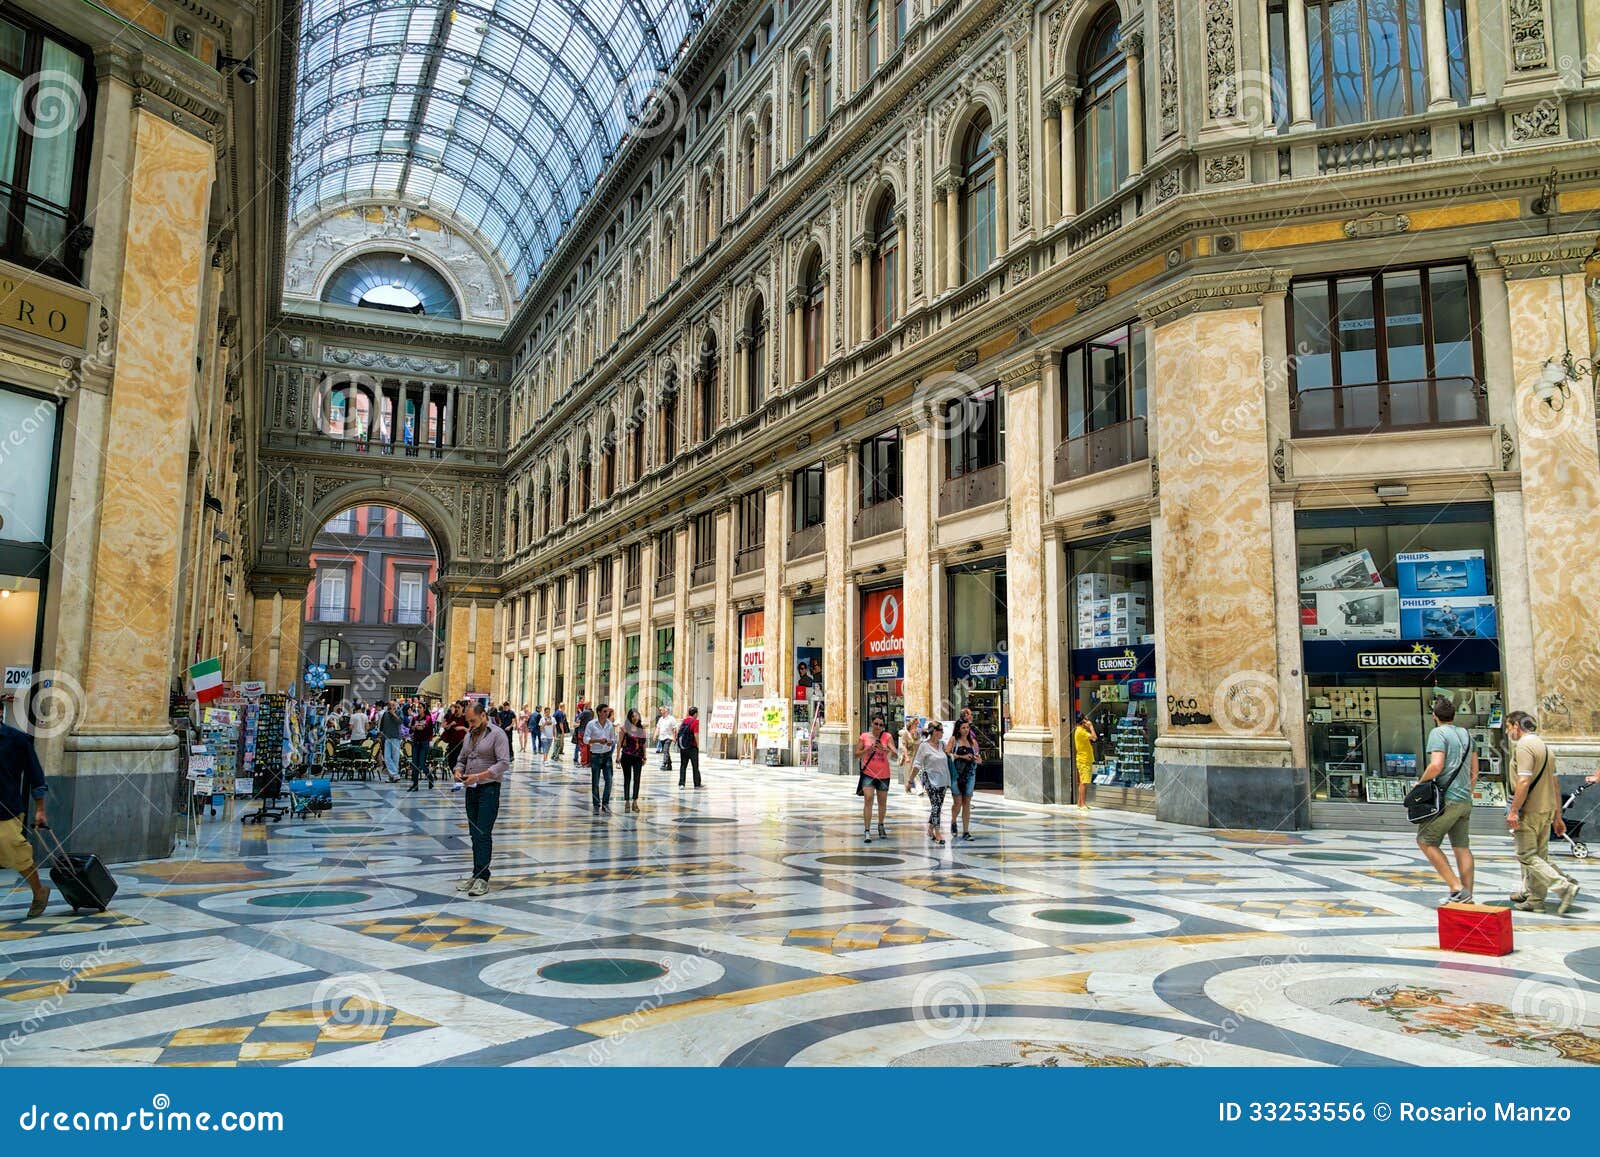 Shopping Gallery, Naples, Italy Editorial Photo - Image of decoration, commercial: 33253556